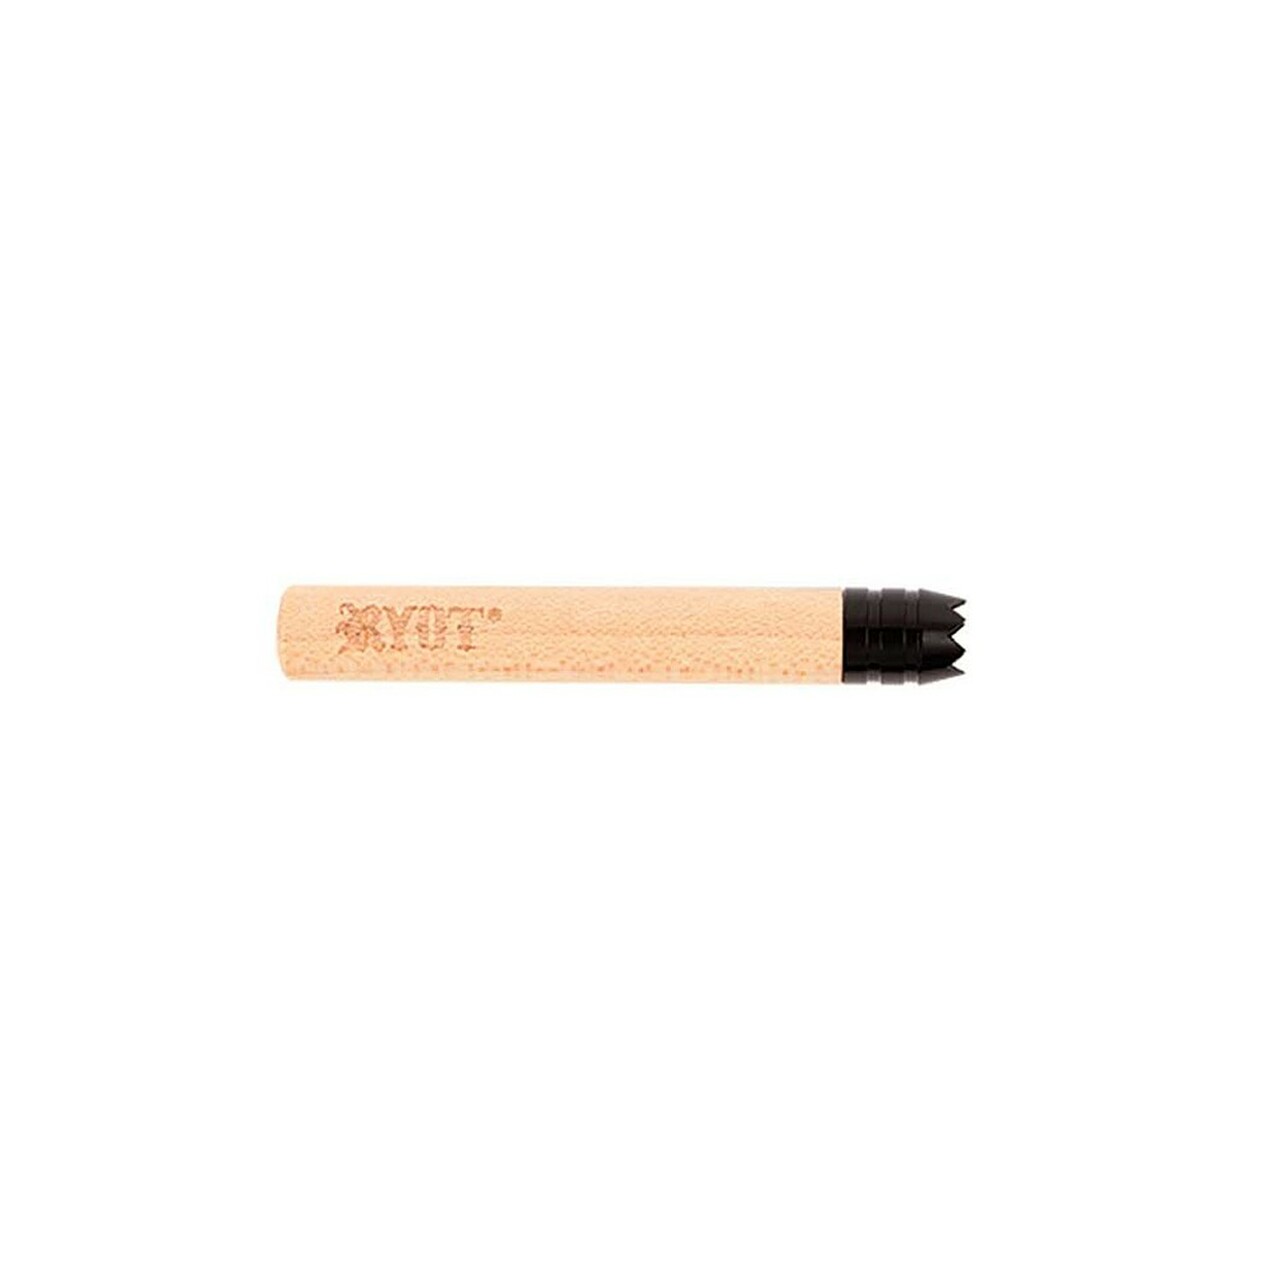 RYOT SHORT (2") WOOD TOBACCO TASTER TWIST WITH BLACK TIP IN MAPLE